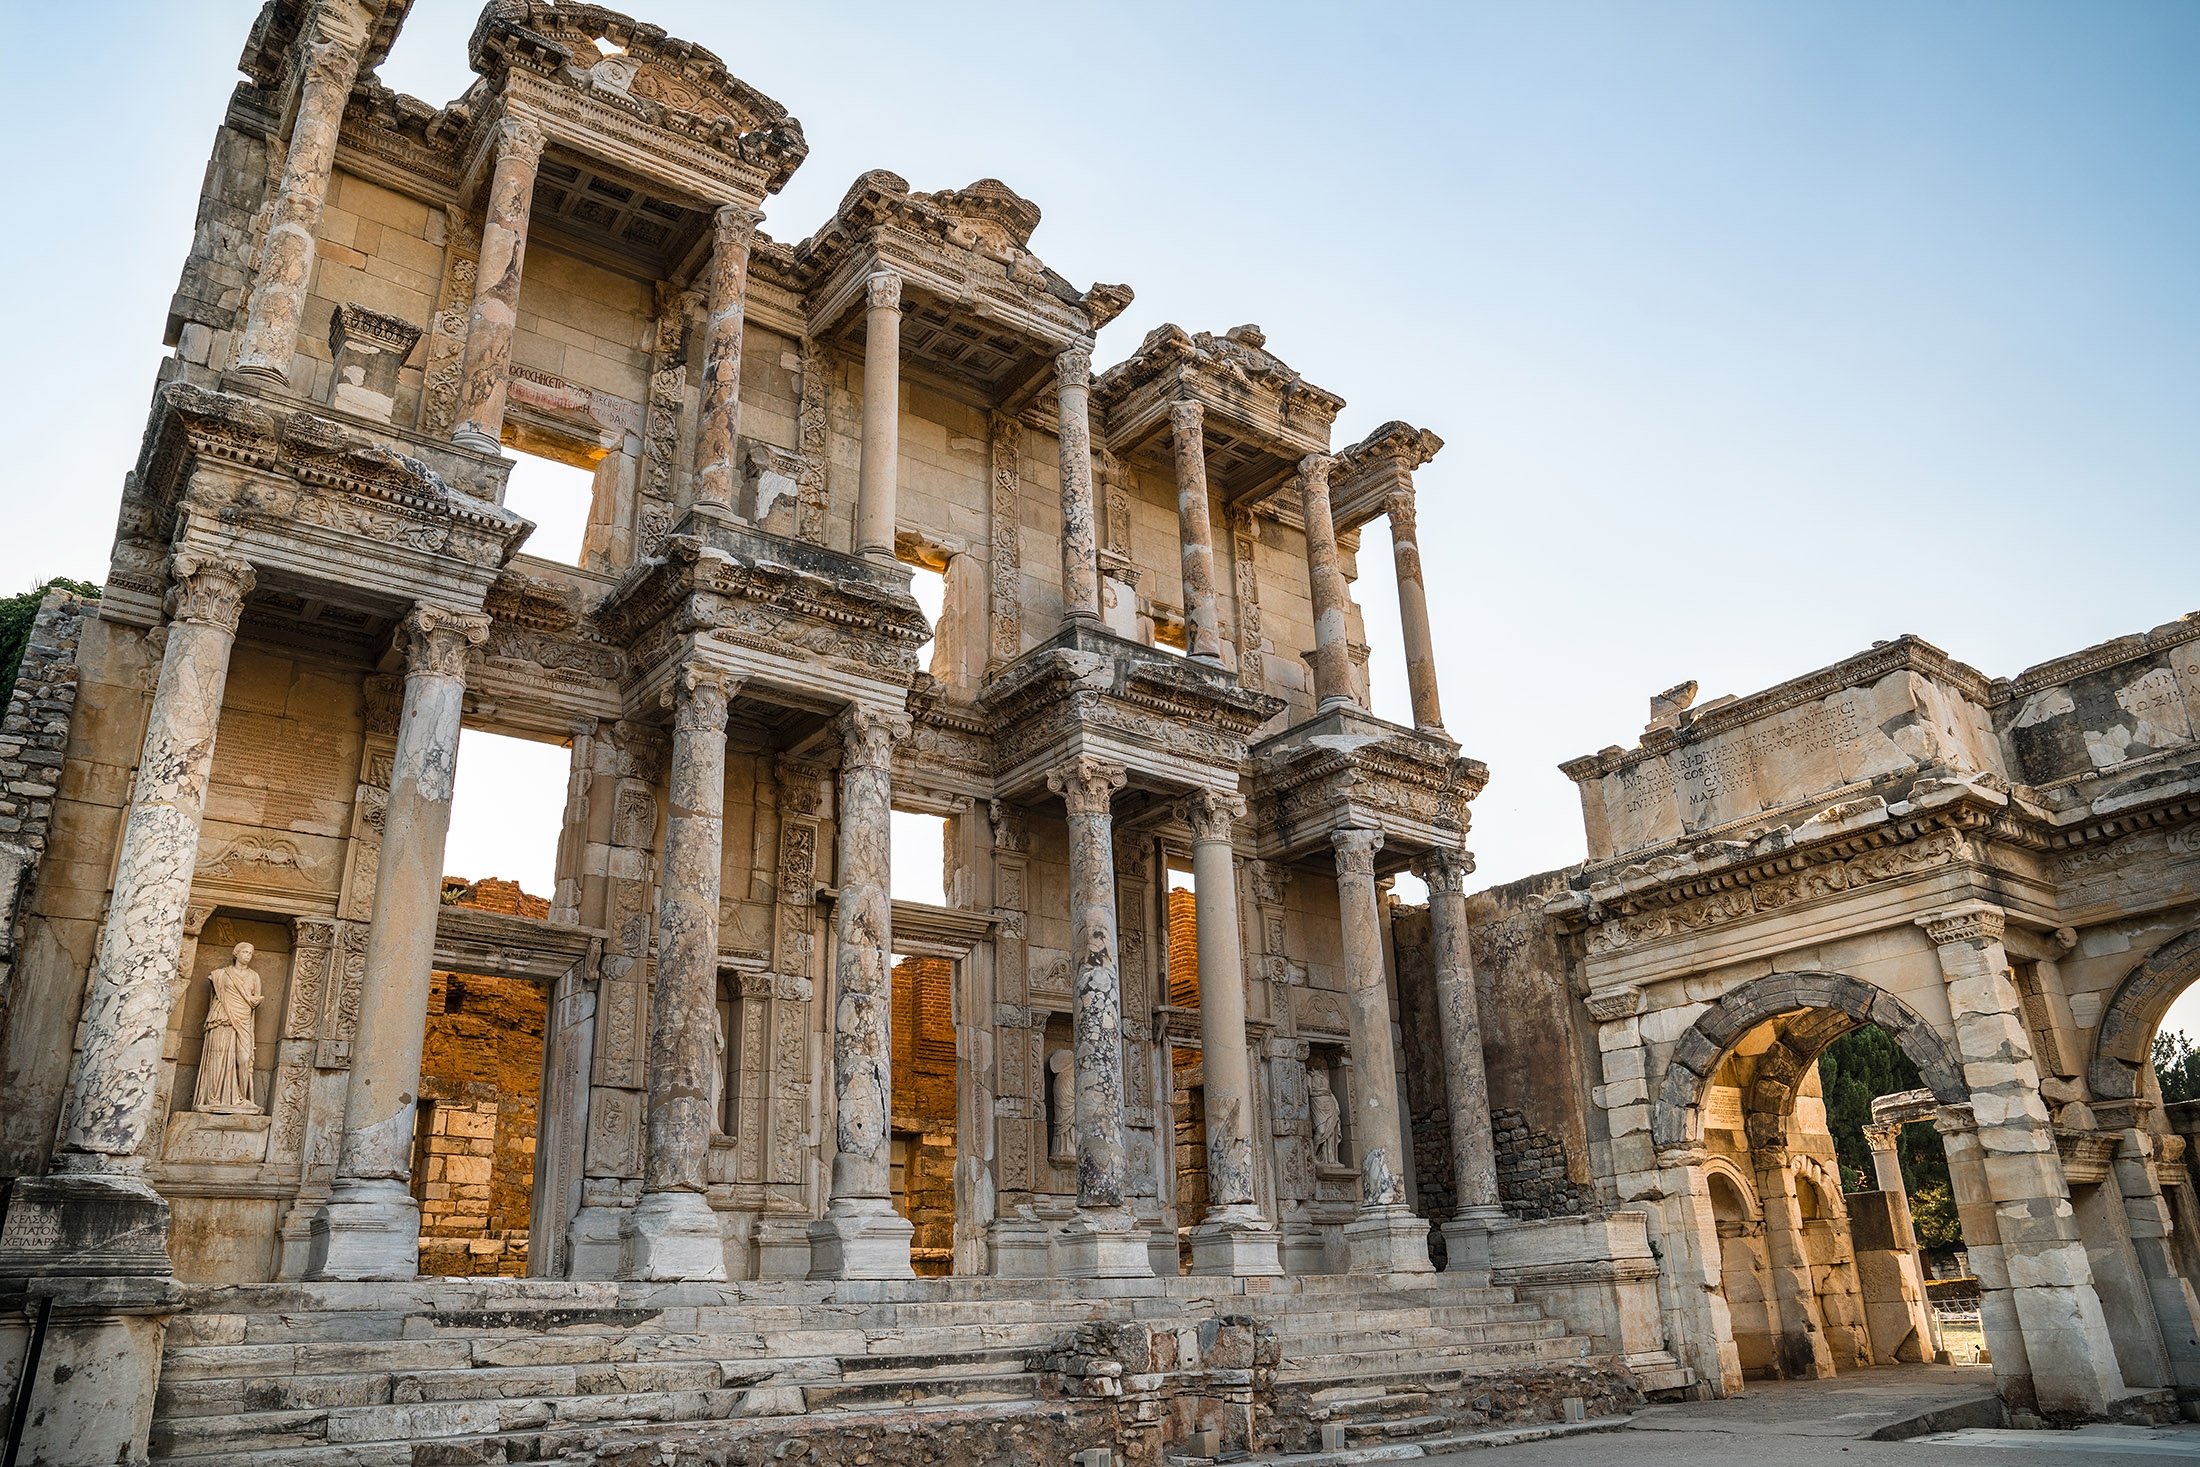 Celsius Library in the ancient city of Ephesus in Turkey. (Shutterstock Photo)